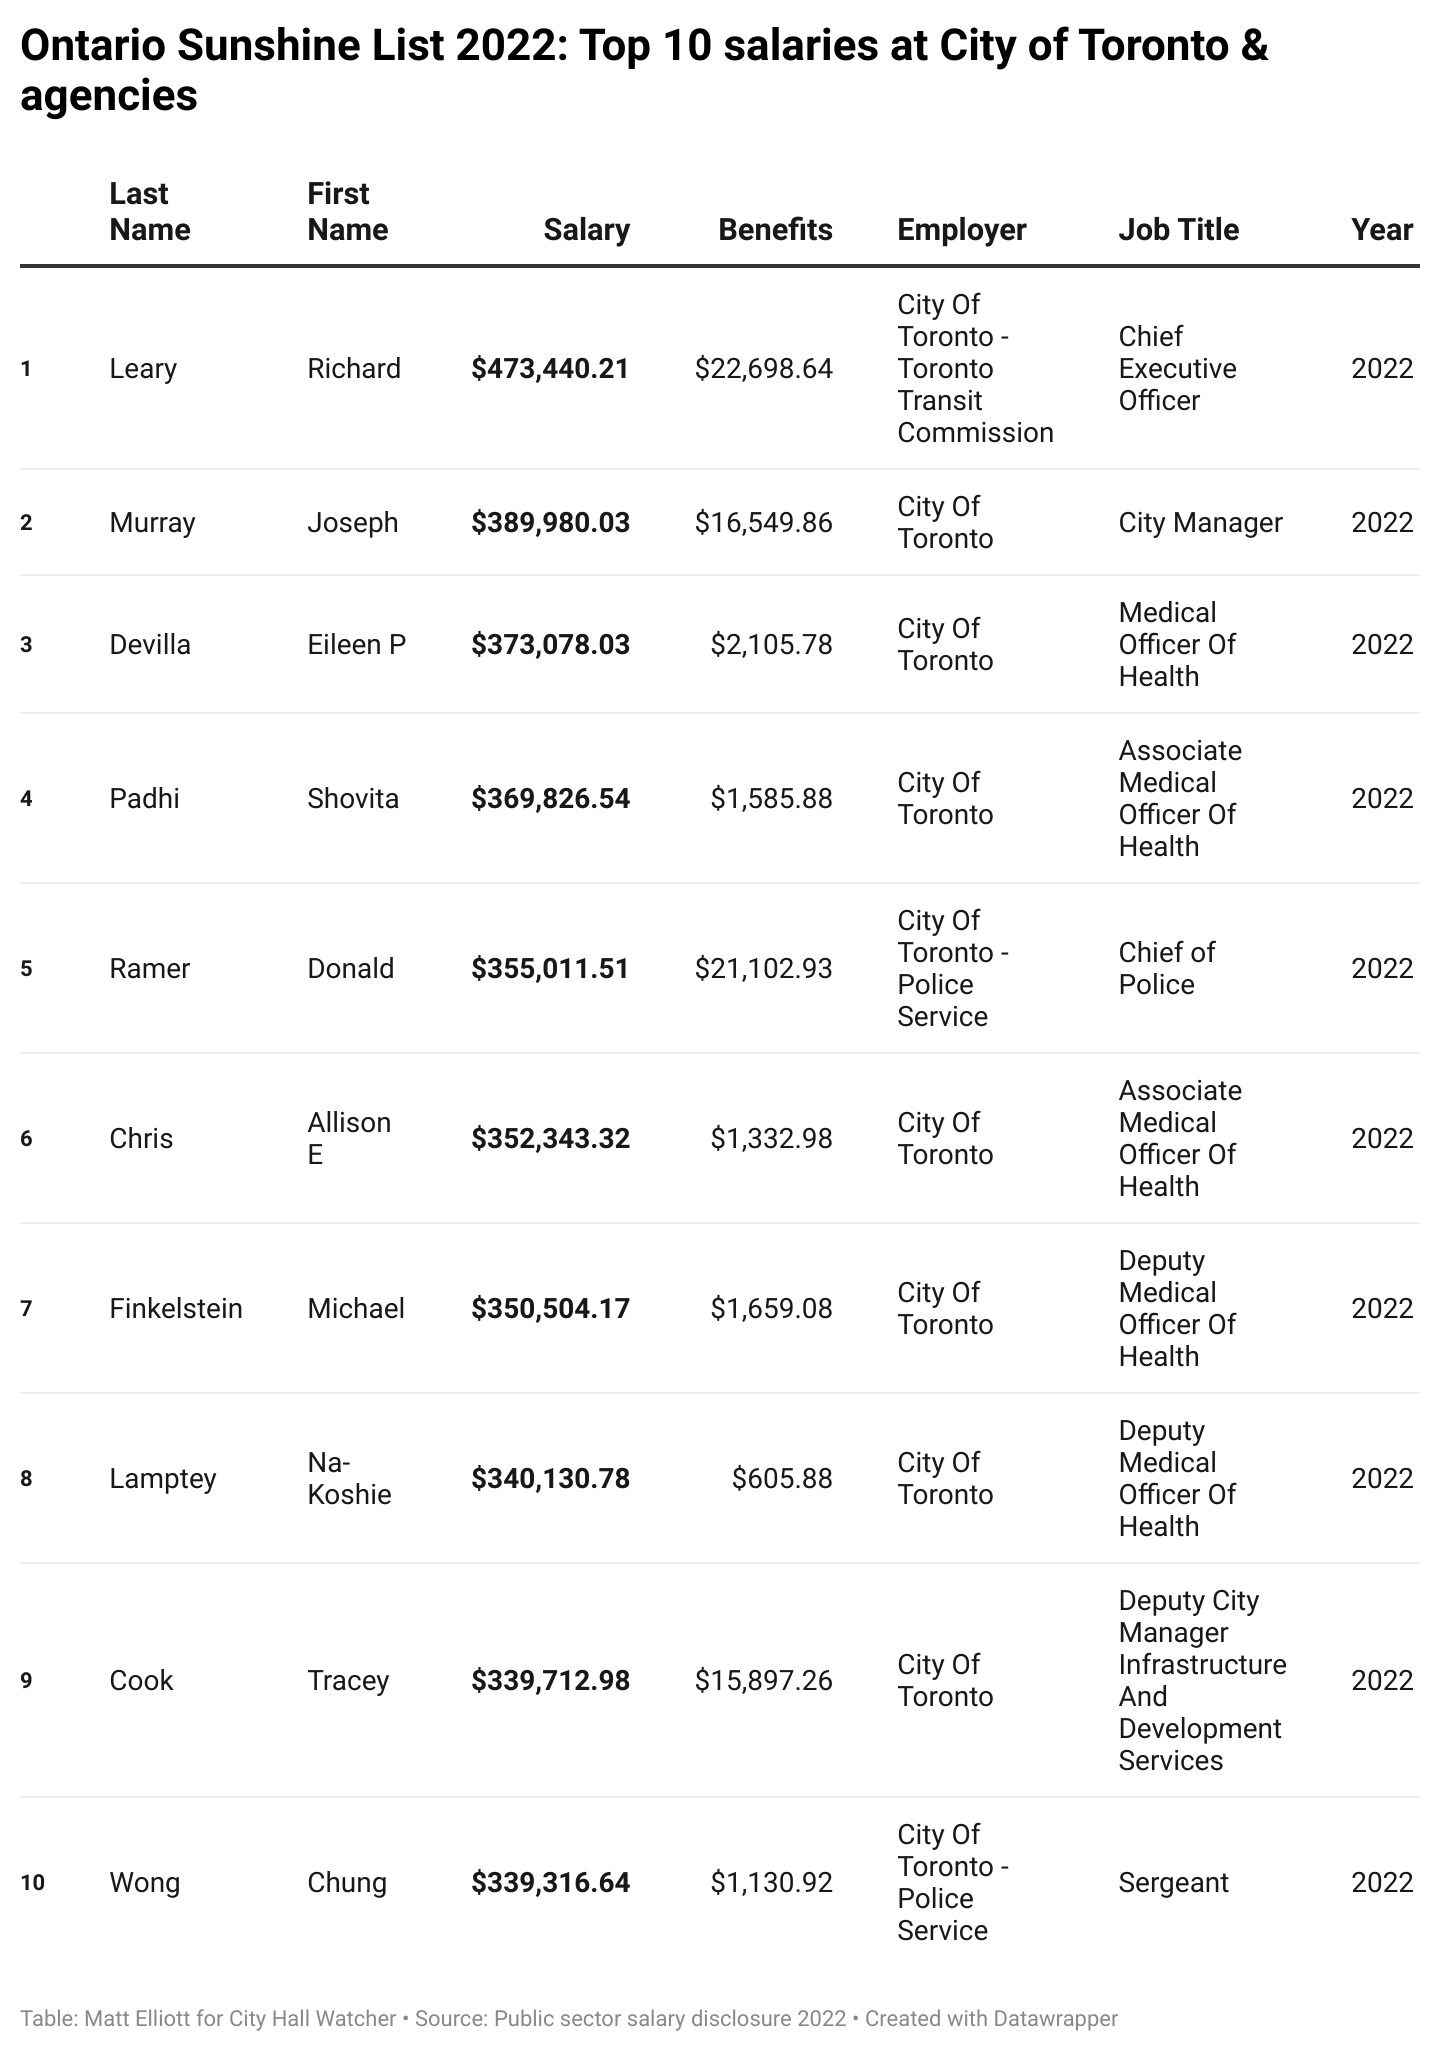 Table listing top ten salaries at City of Toronto and its agencies from the 2022 Sunshine List